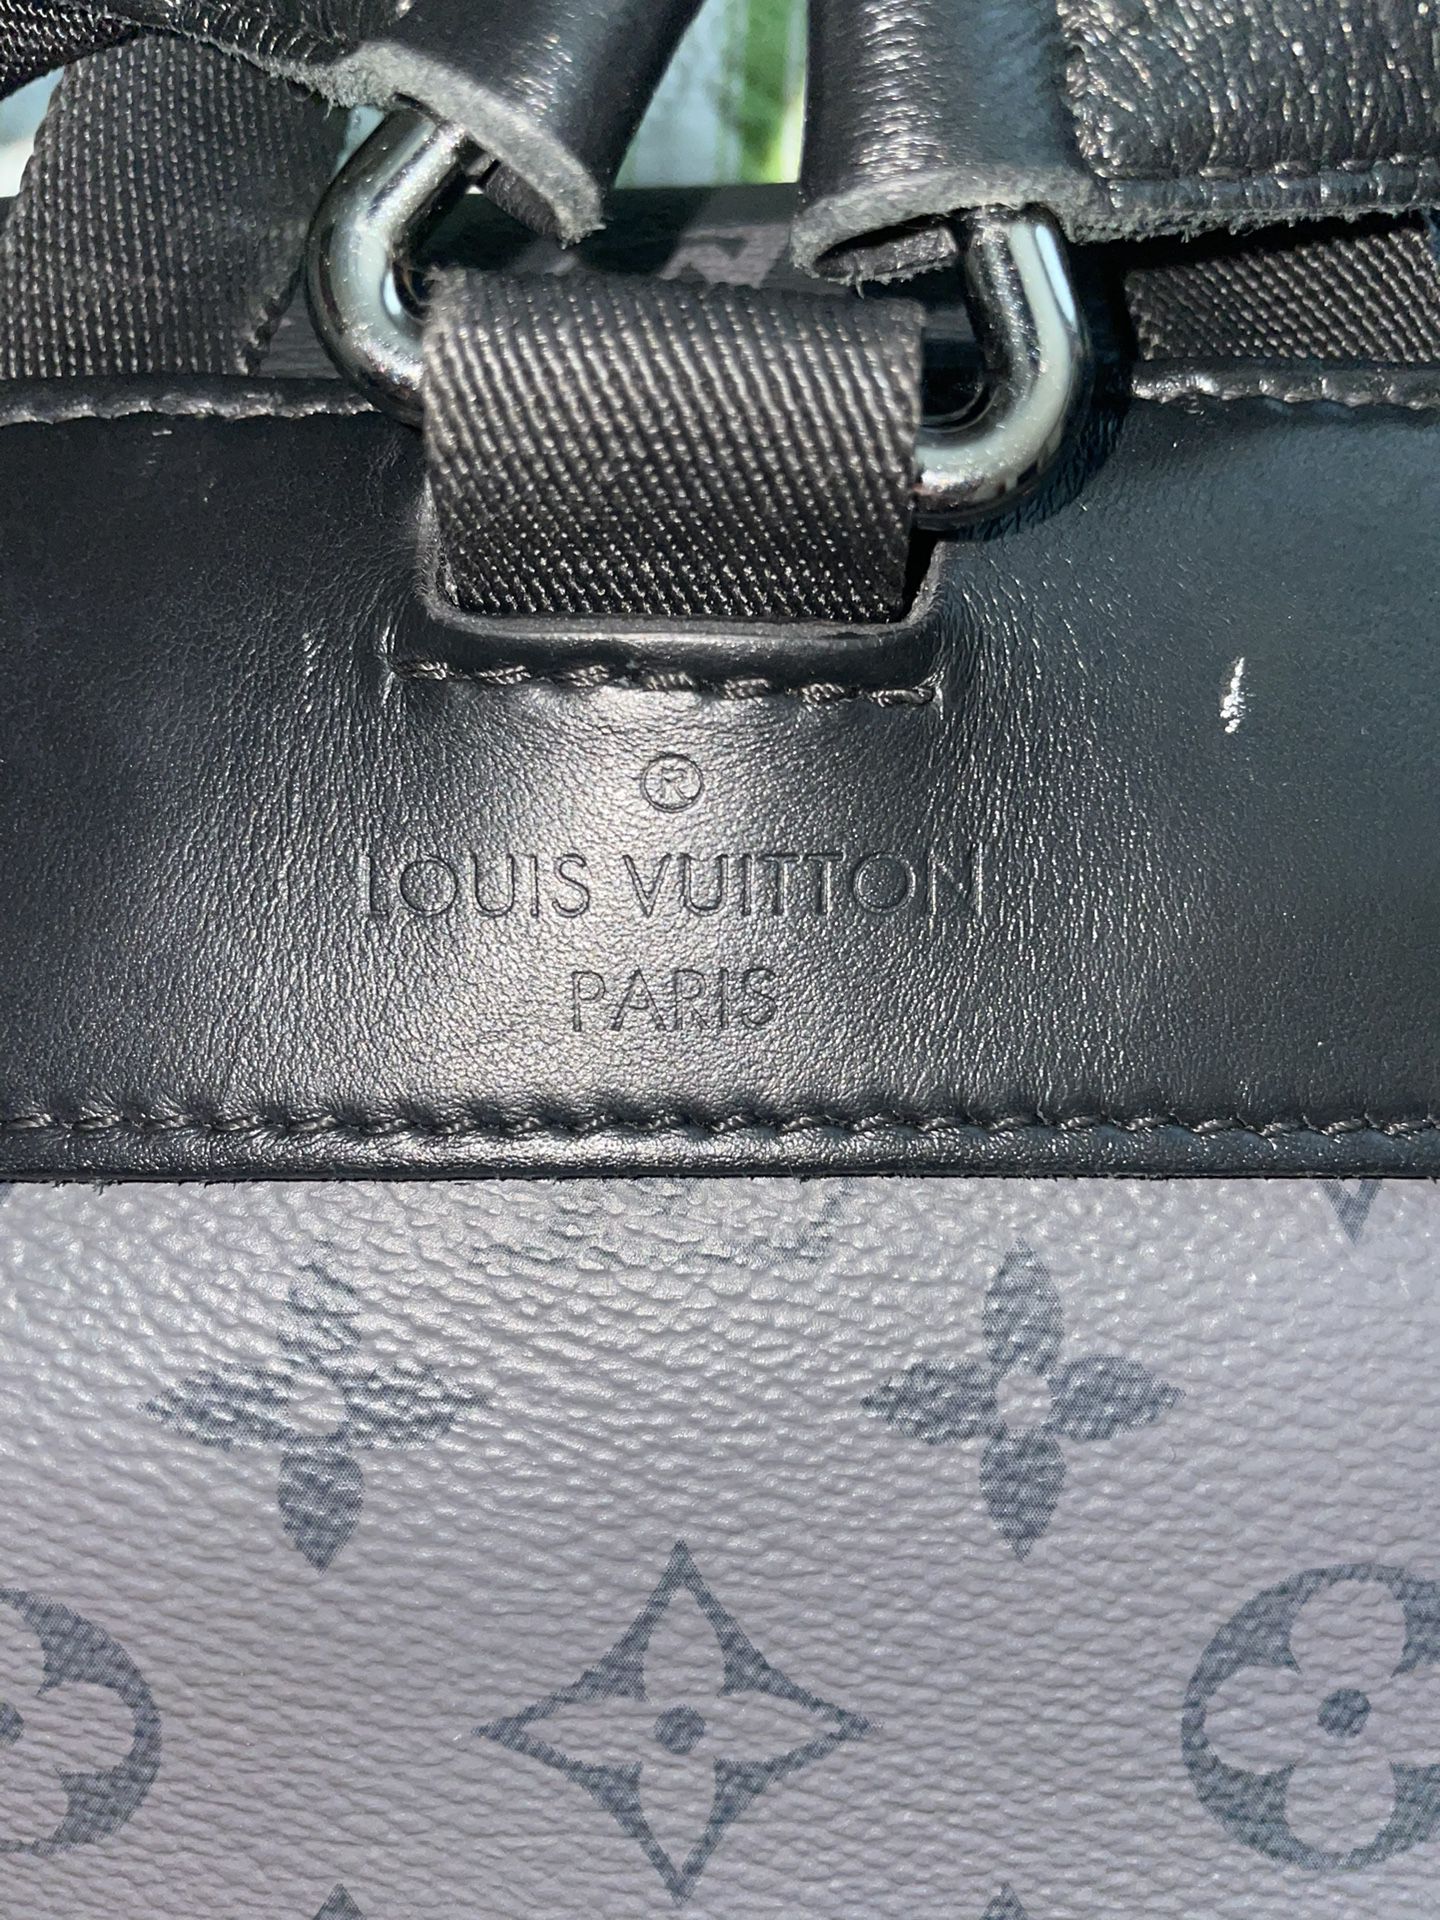 Monogram Louis Vuitton Backpack for Sale in El Paso, TX - OfferUp